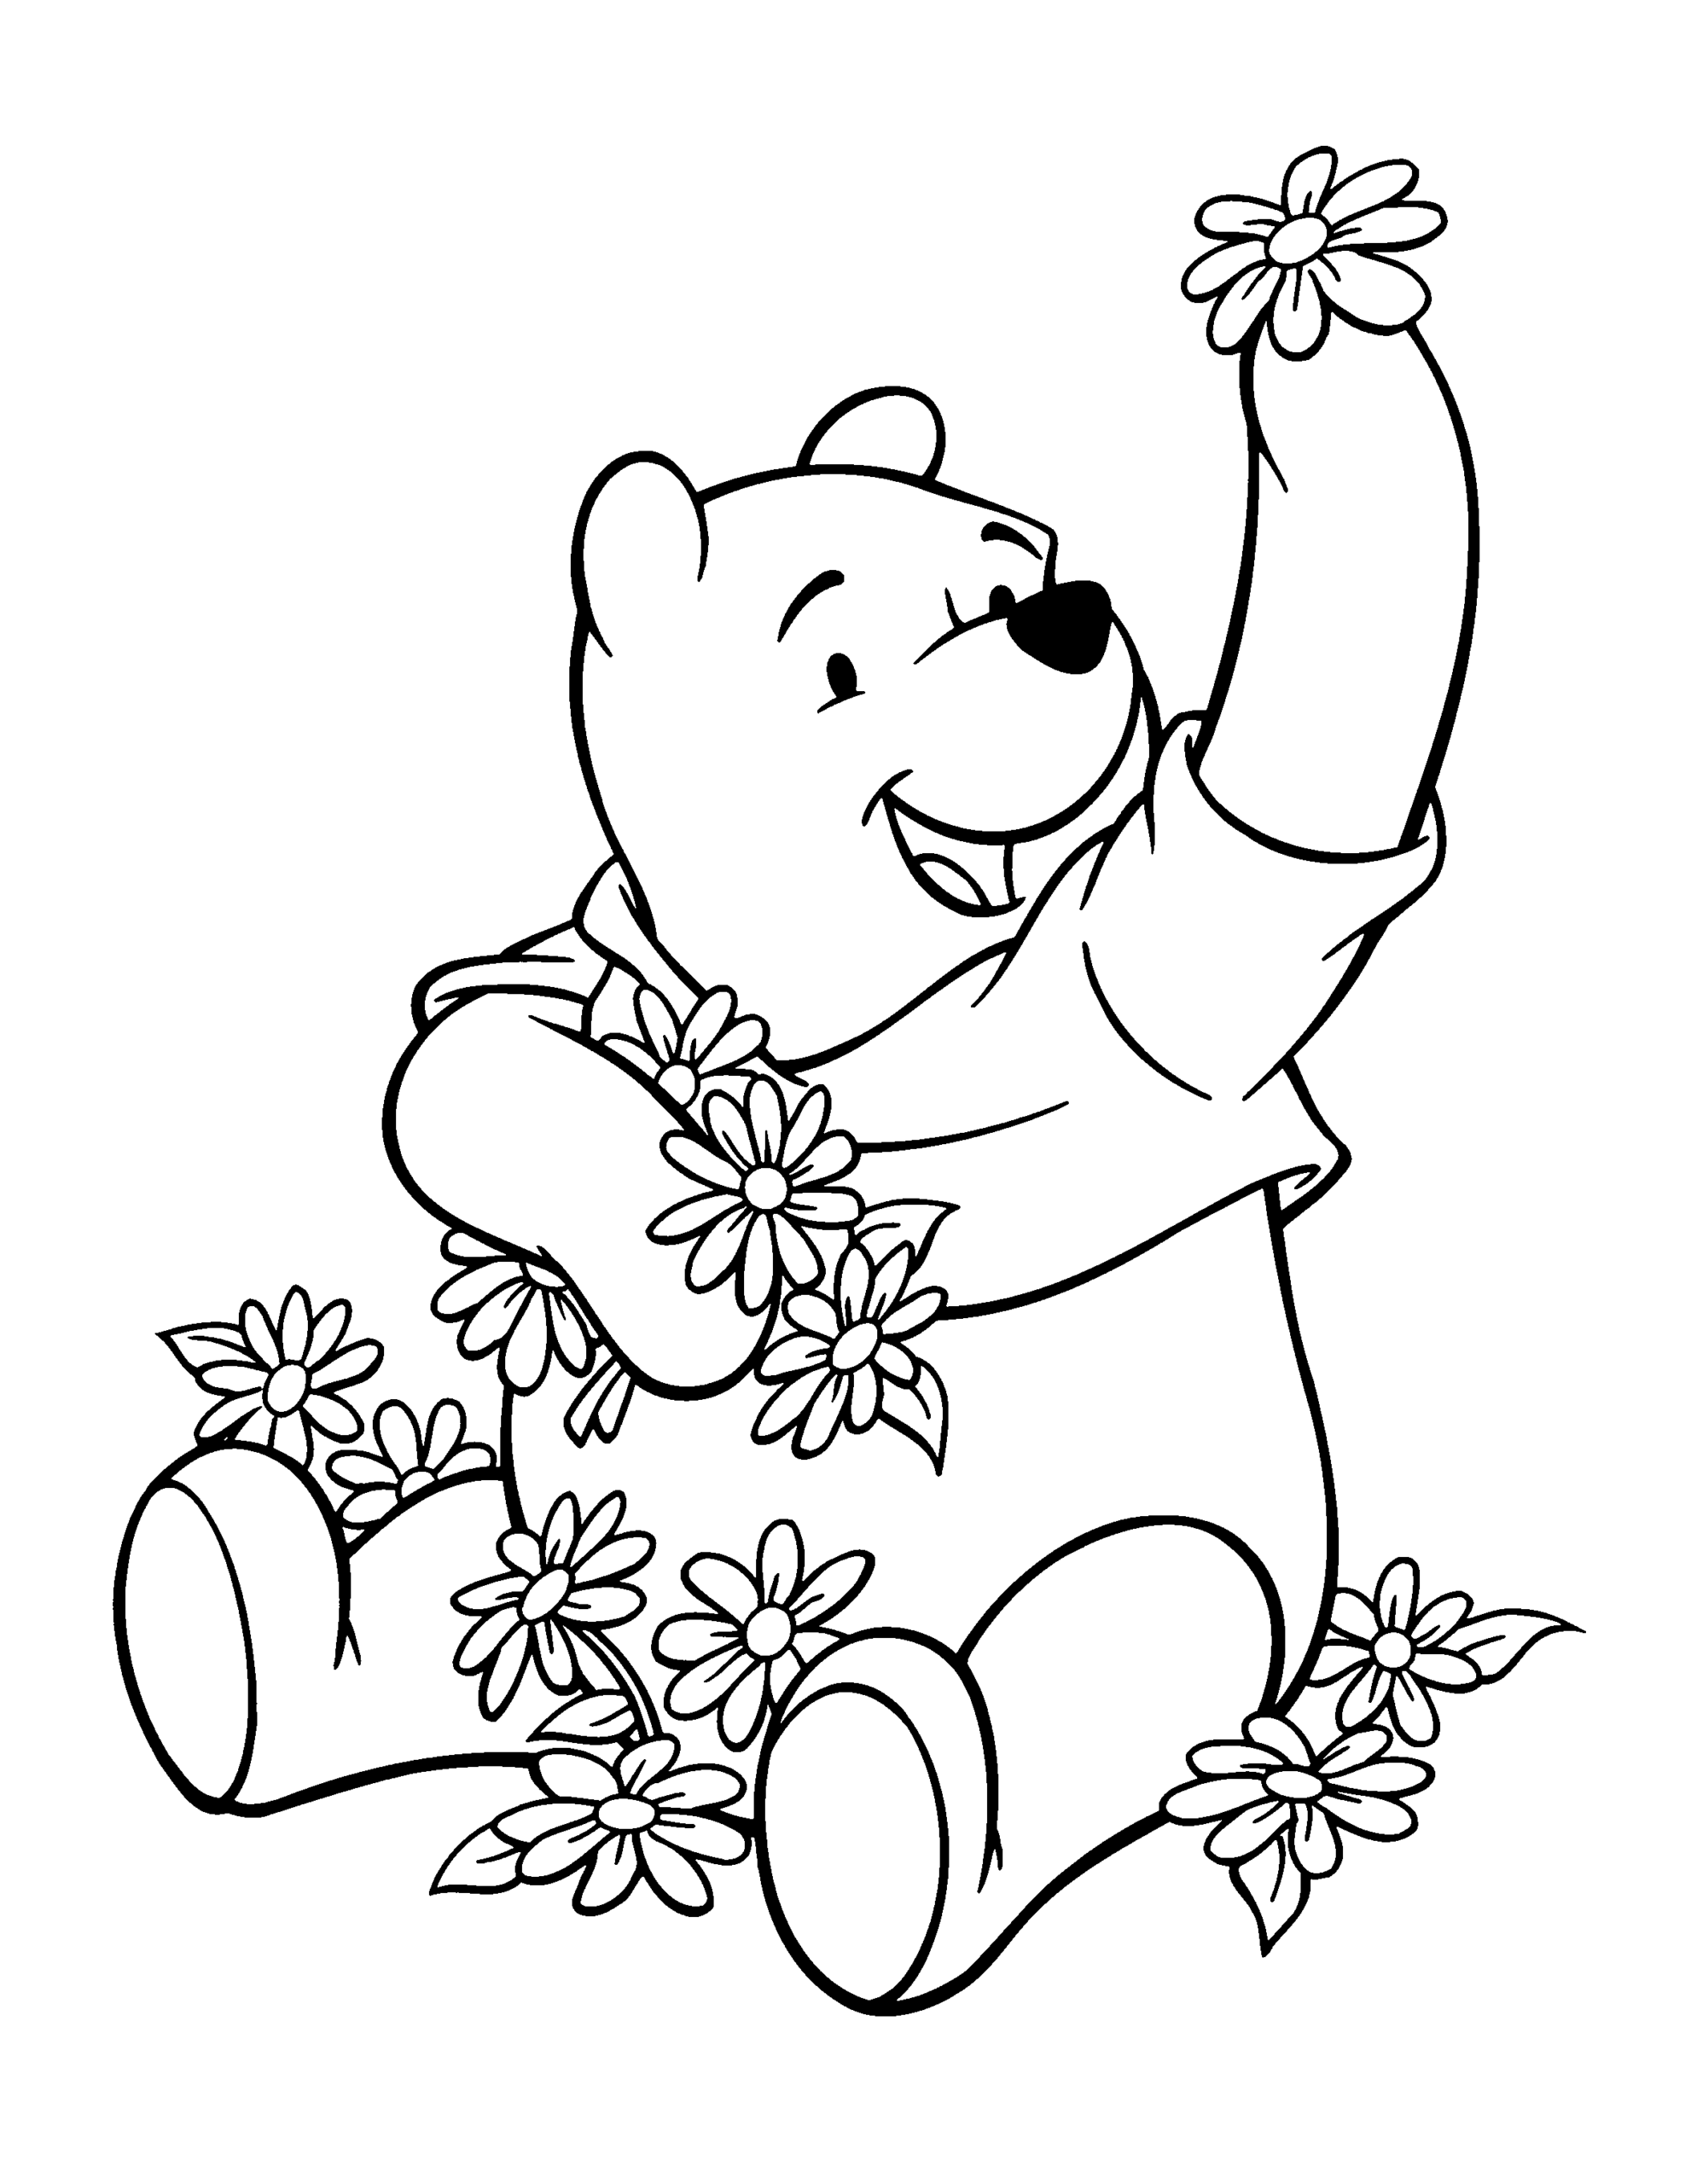 Winnie the Pooh Coloring Pages Cartoons winnie the pooh 118 Printable 2020 7098 Coloring4free